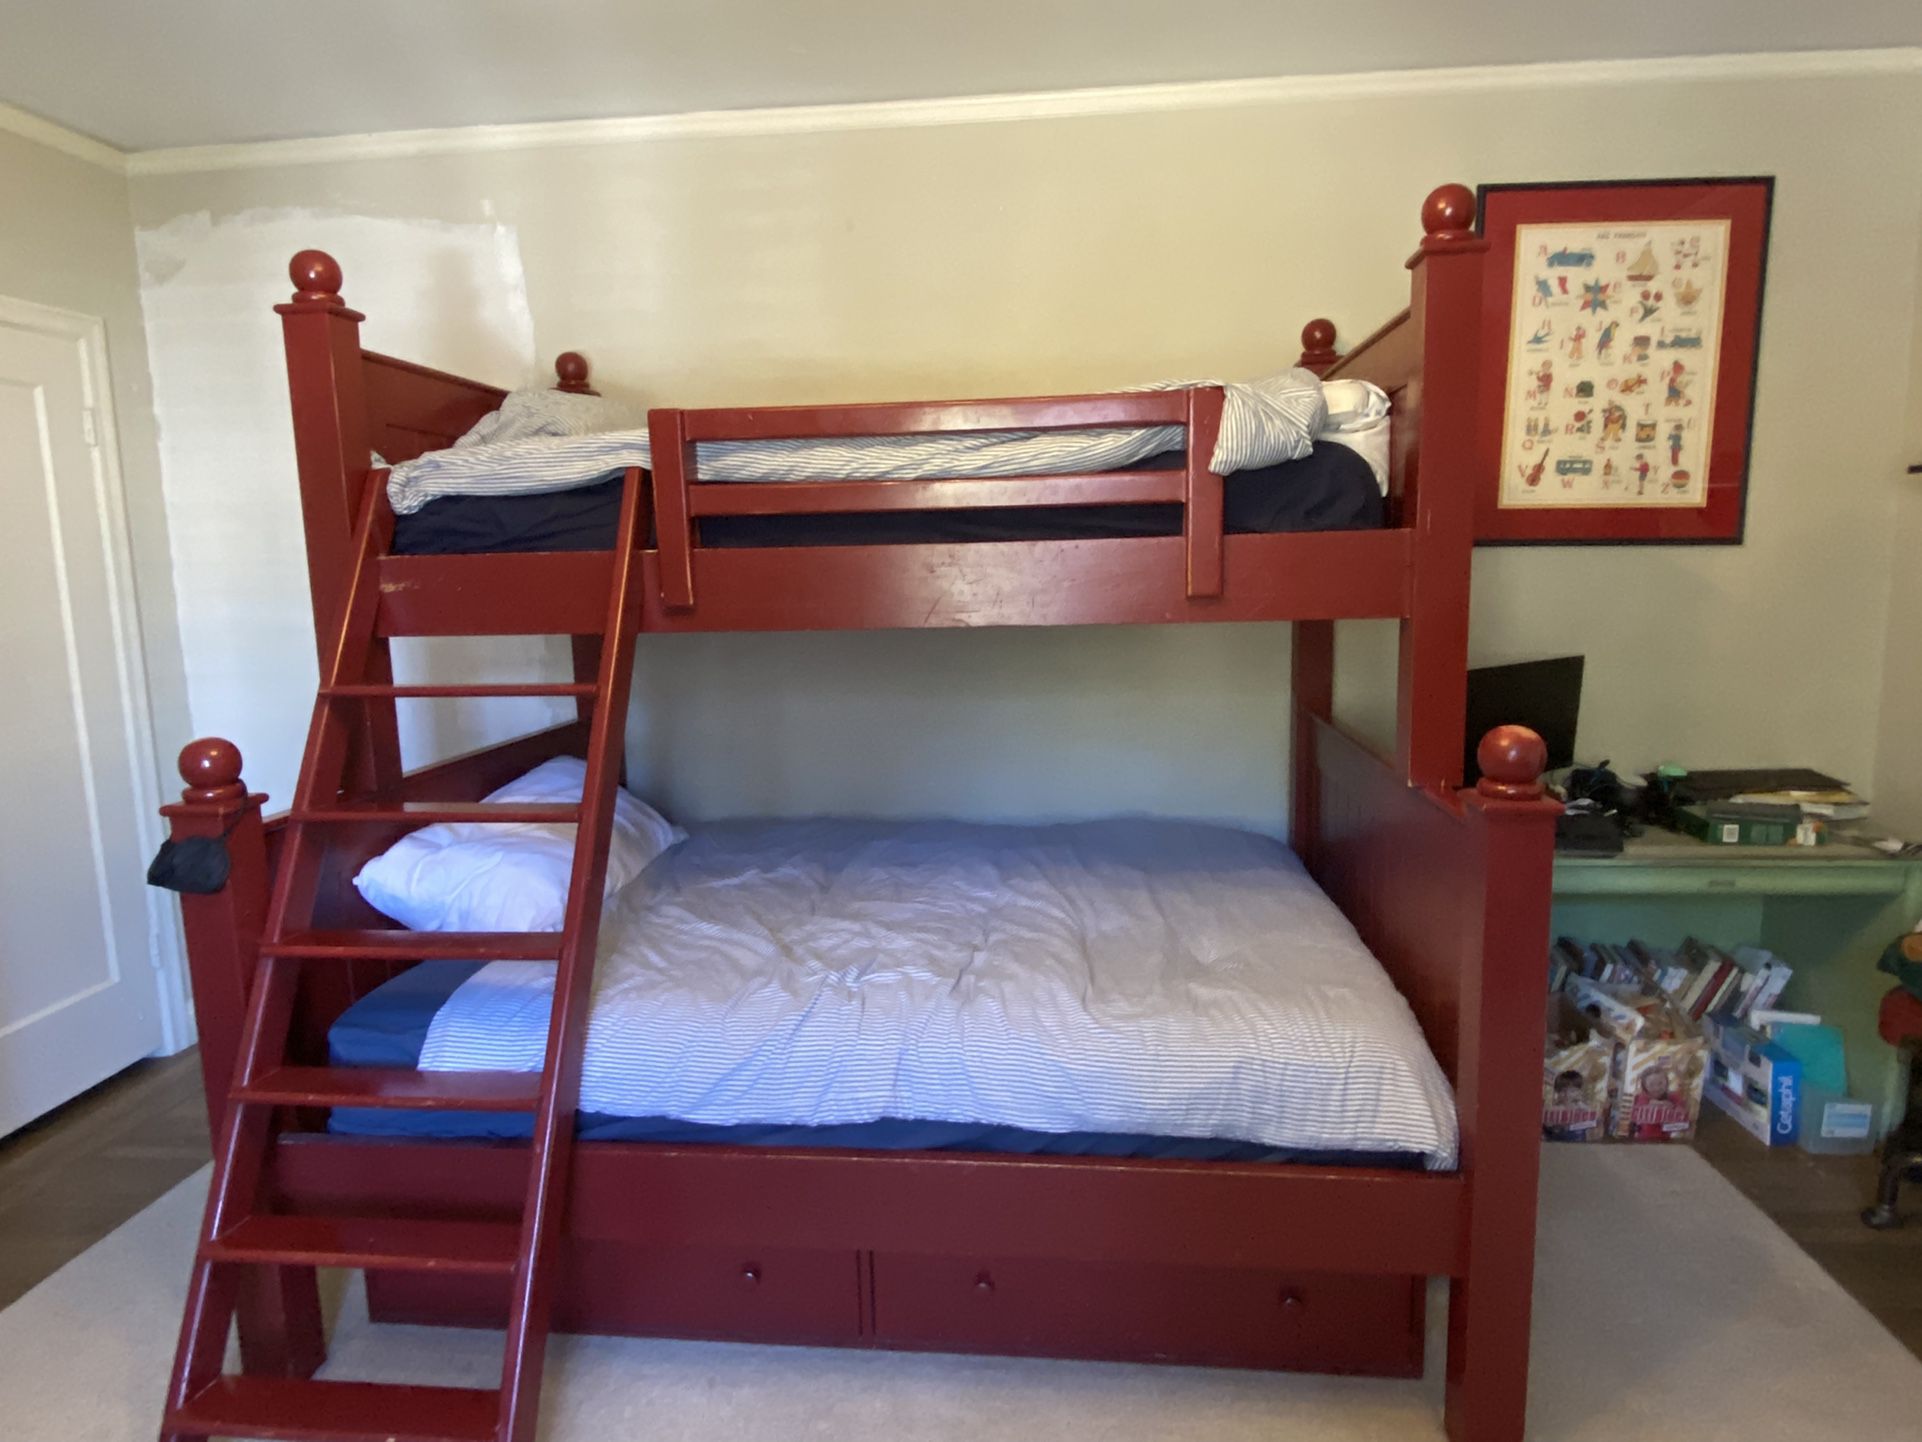 Of Nod Bunk Bed High Quality Furniture, Land Of Nod Bunk Beds